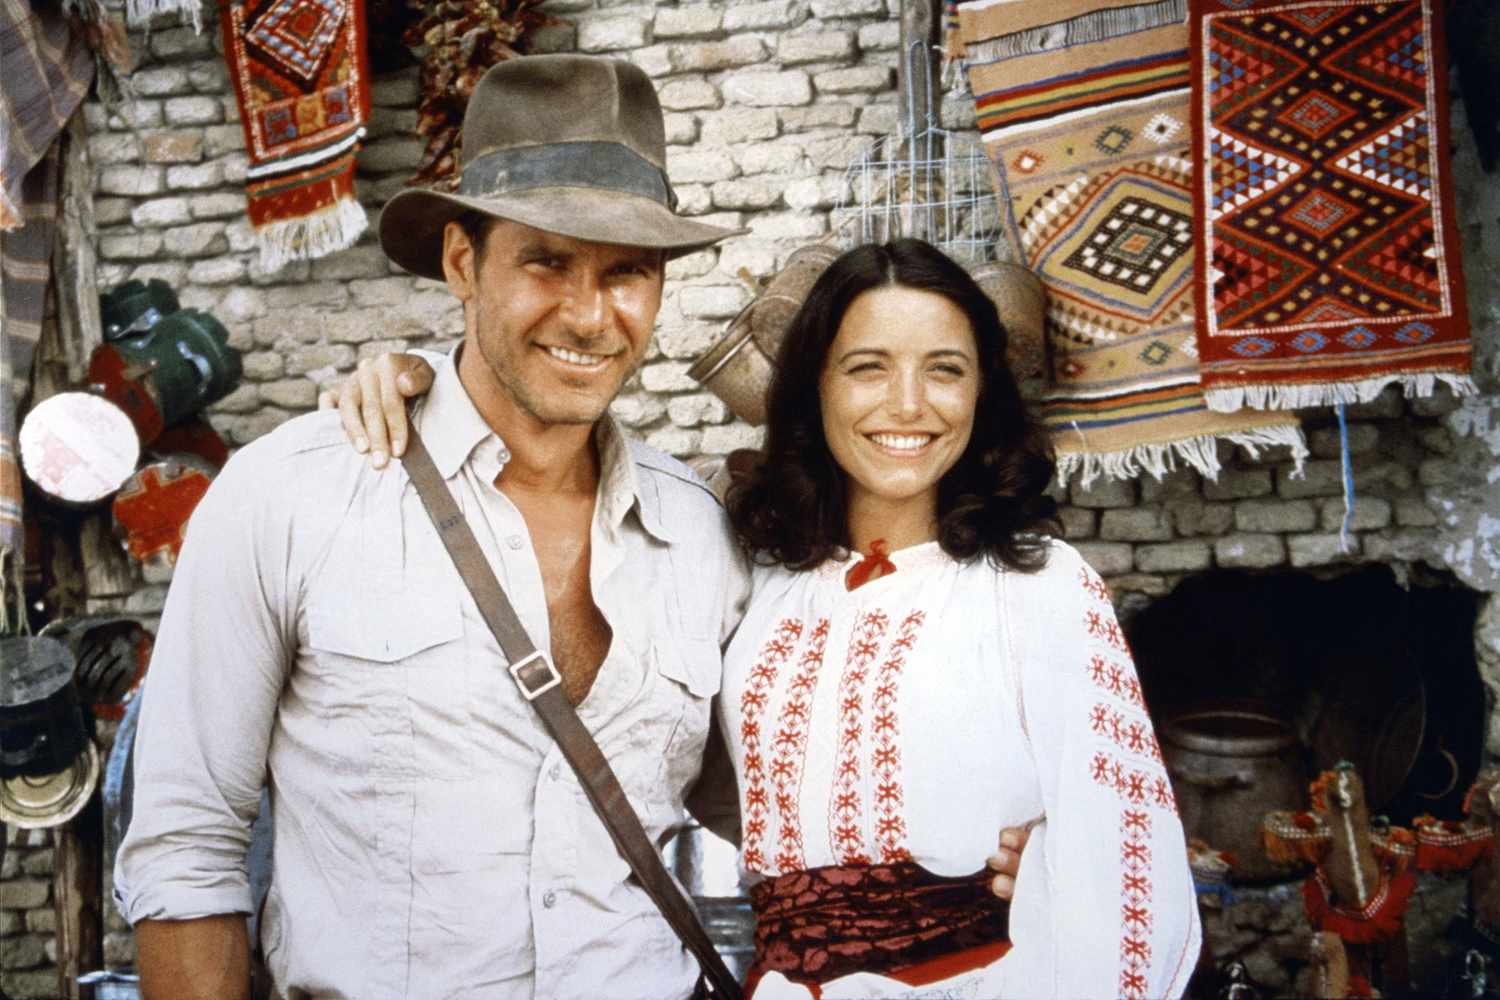 Harrison Ford and Karen Allen on the set of 'Raiders of the Lost Ark'